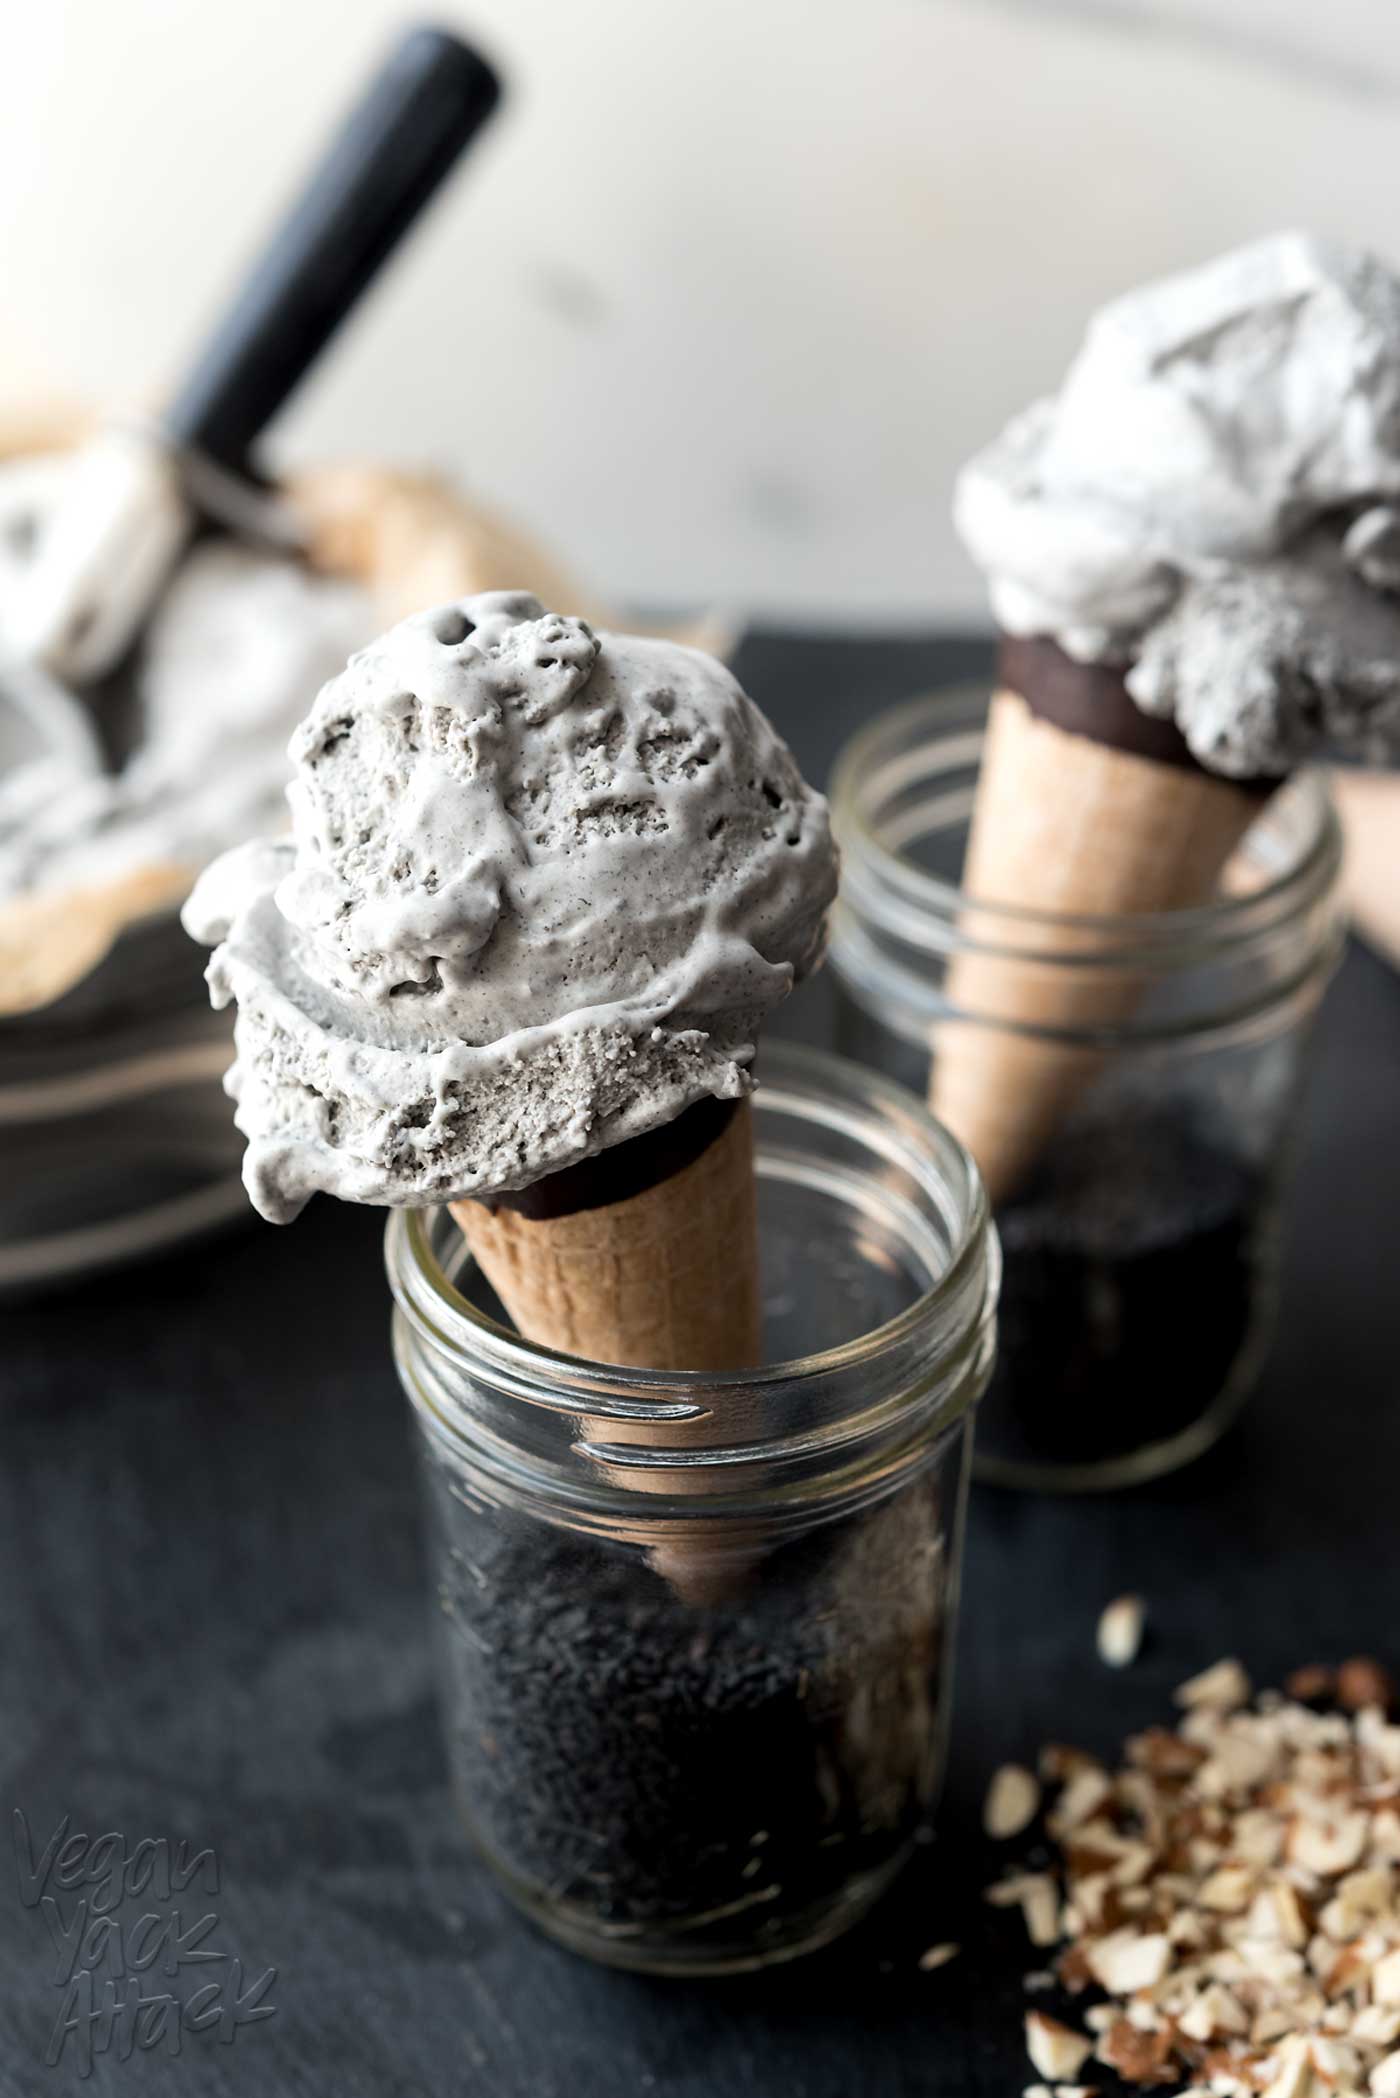 Black Sesame Coconut Ice Cream! Dairy-free, fluffy and oh-so-perfect for cooling off this summer. #vegan #glutenfree #soyfree #veganyackattack